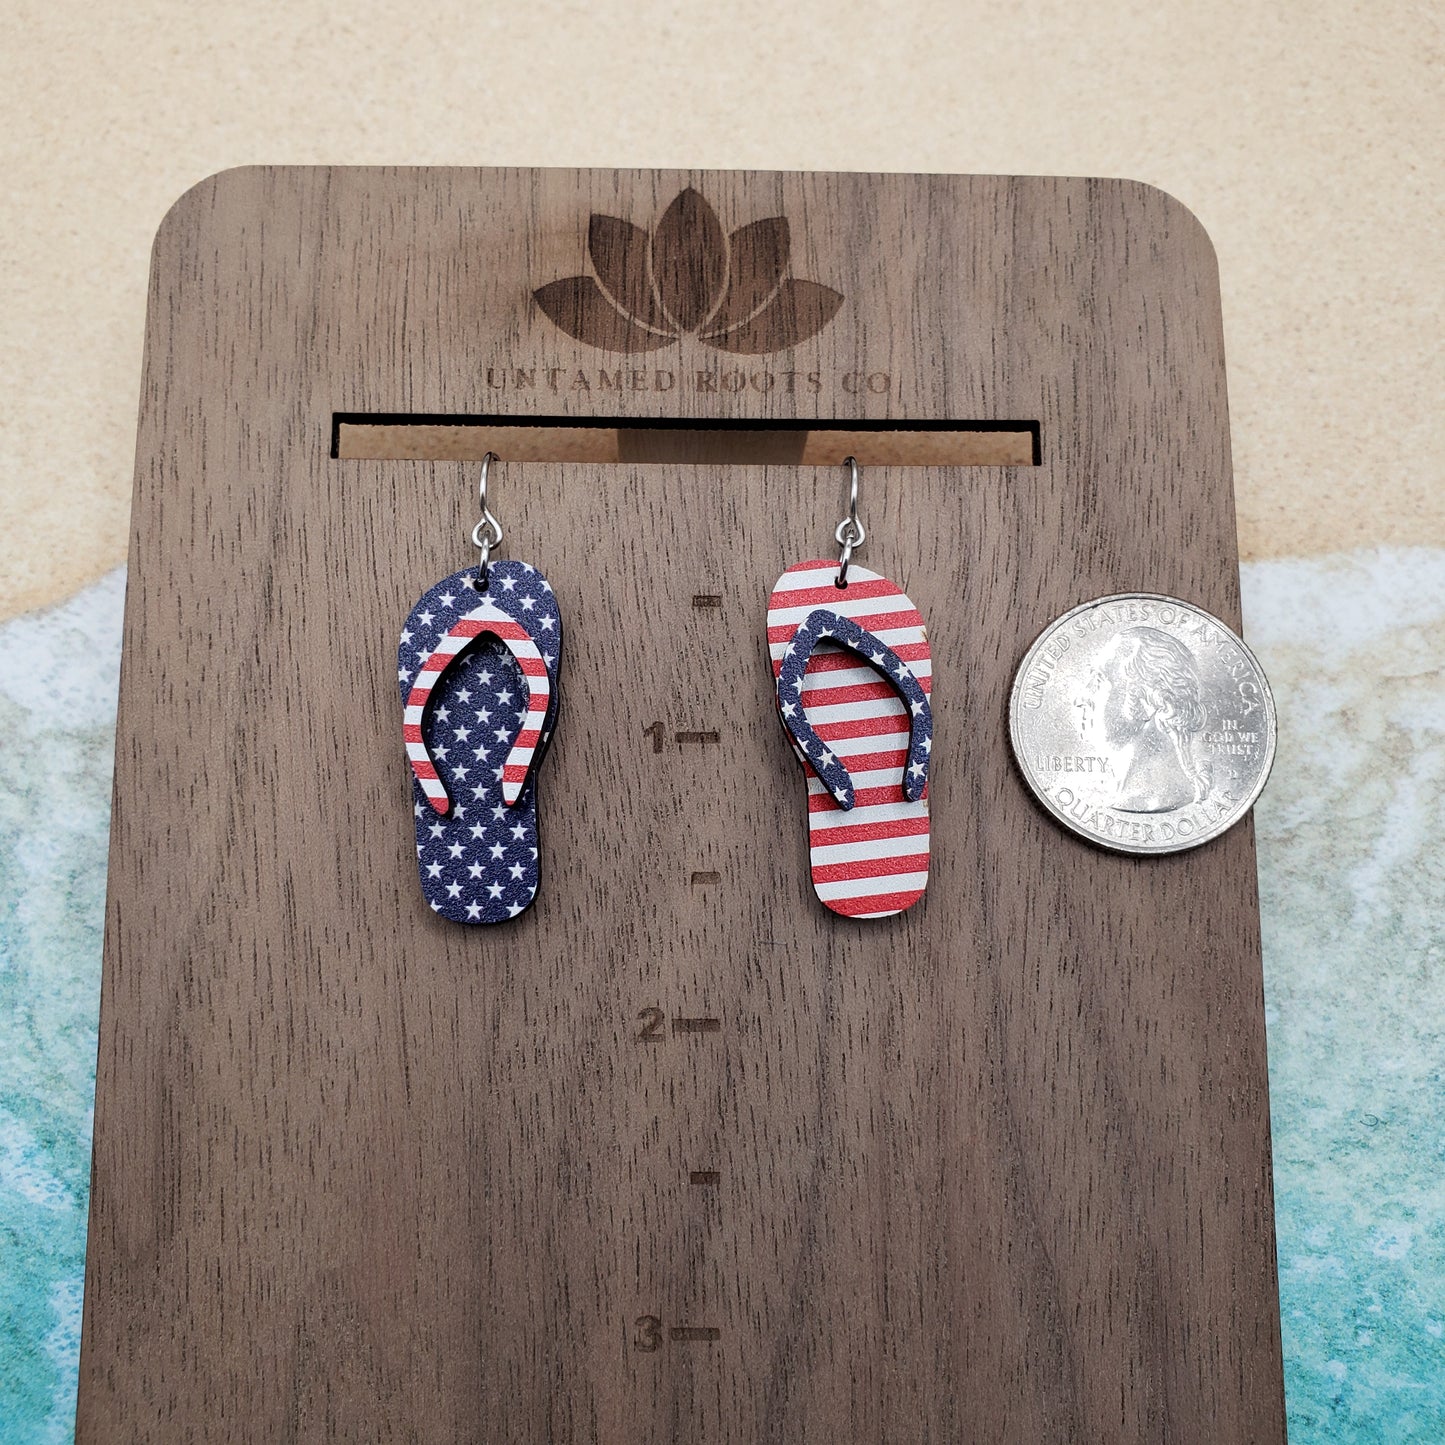 Stars and Stripes Flip Flop Earrings